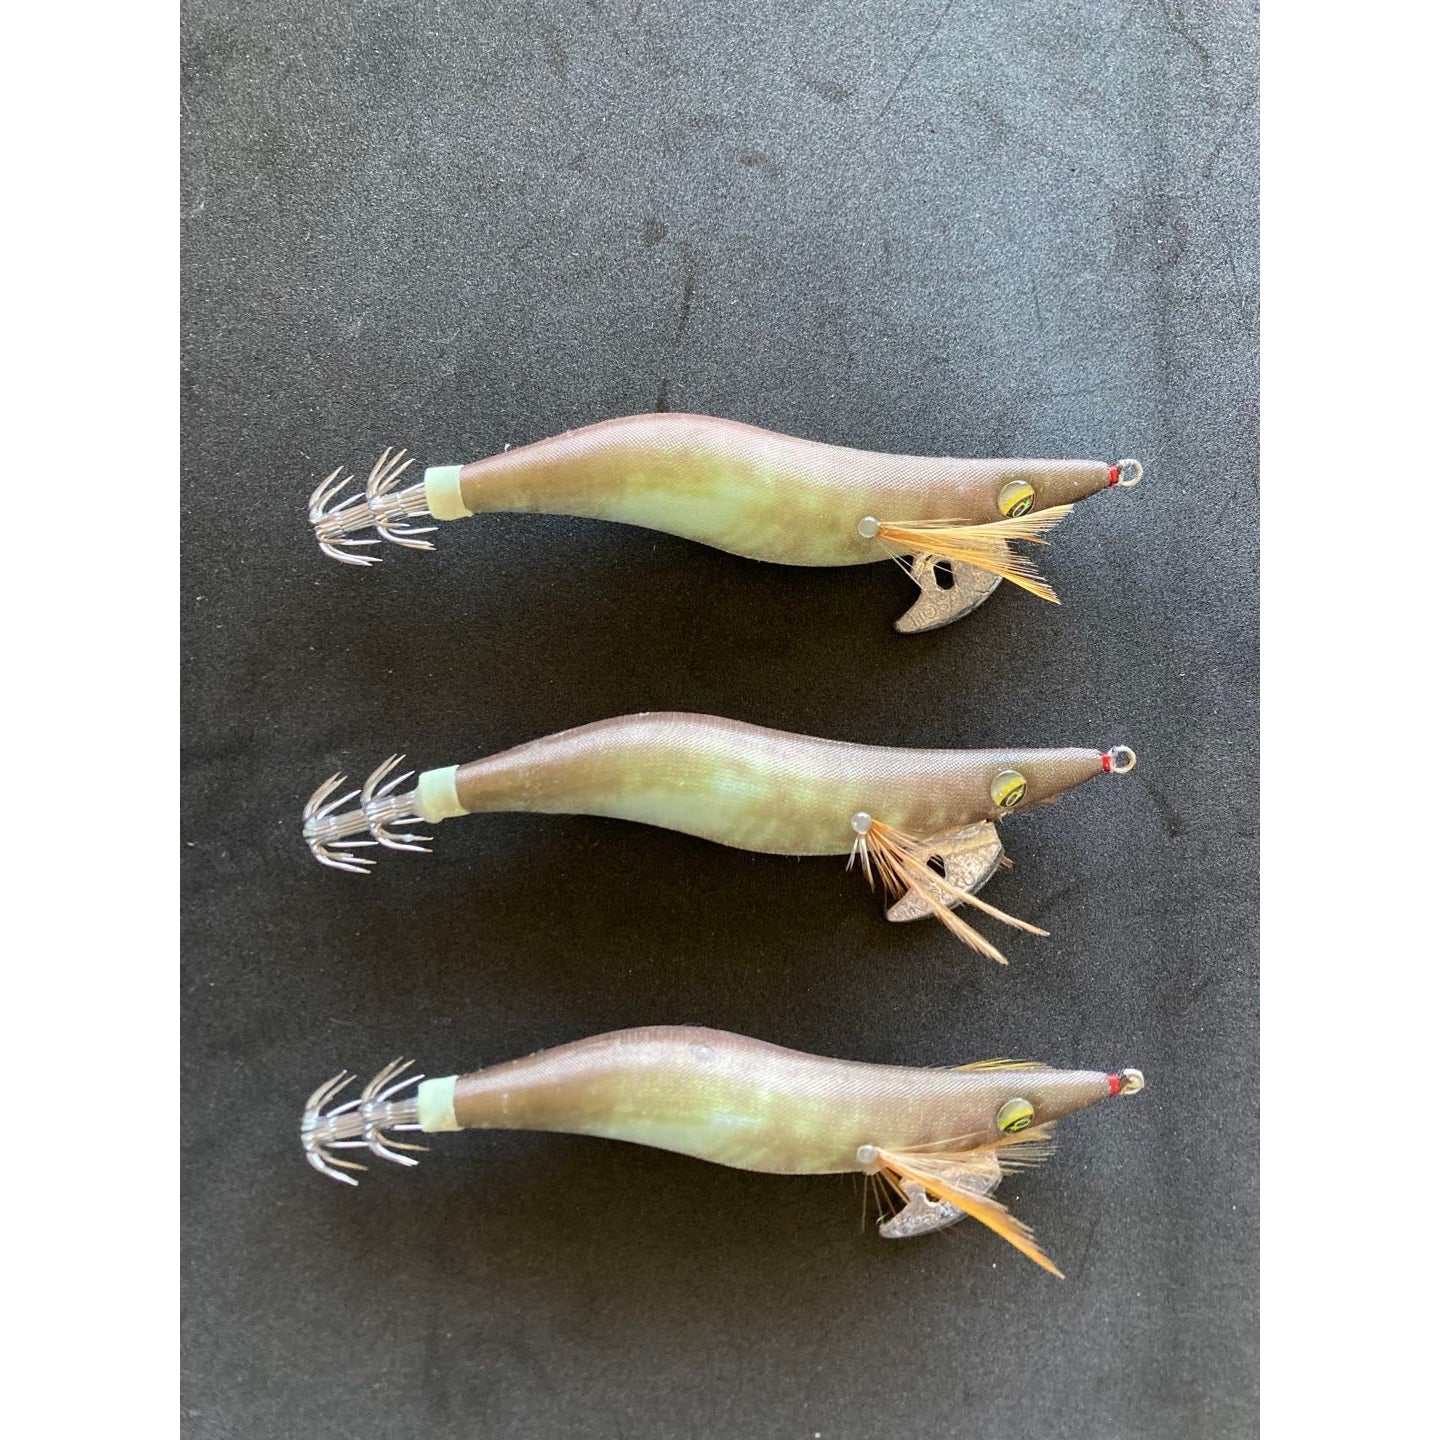 3 X Lure Squid Jig Size Fishing Tackle 172